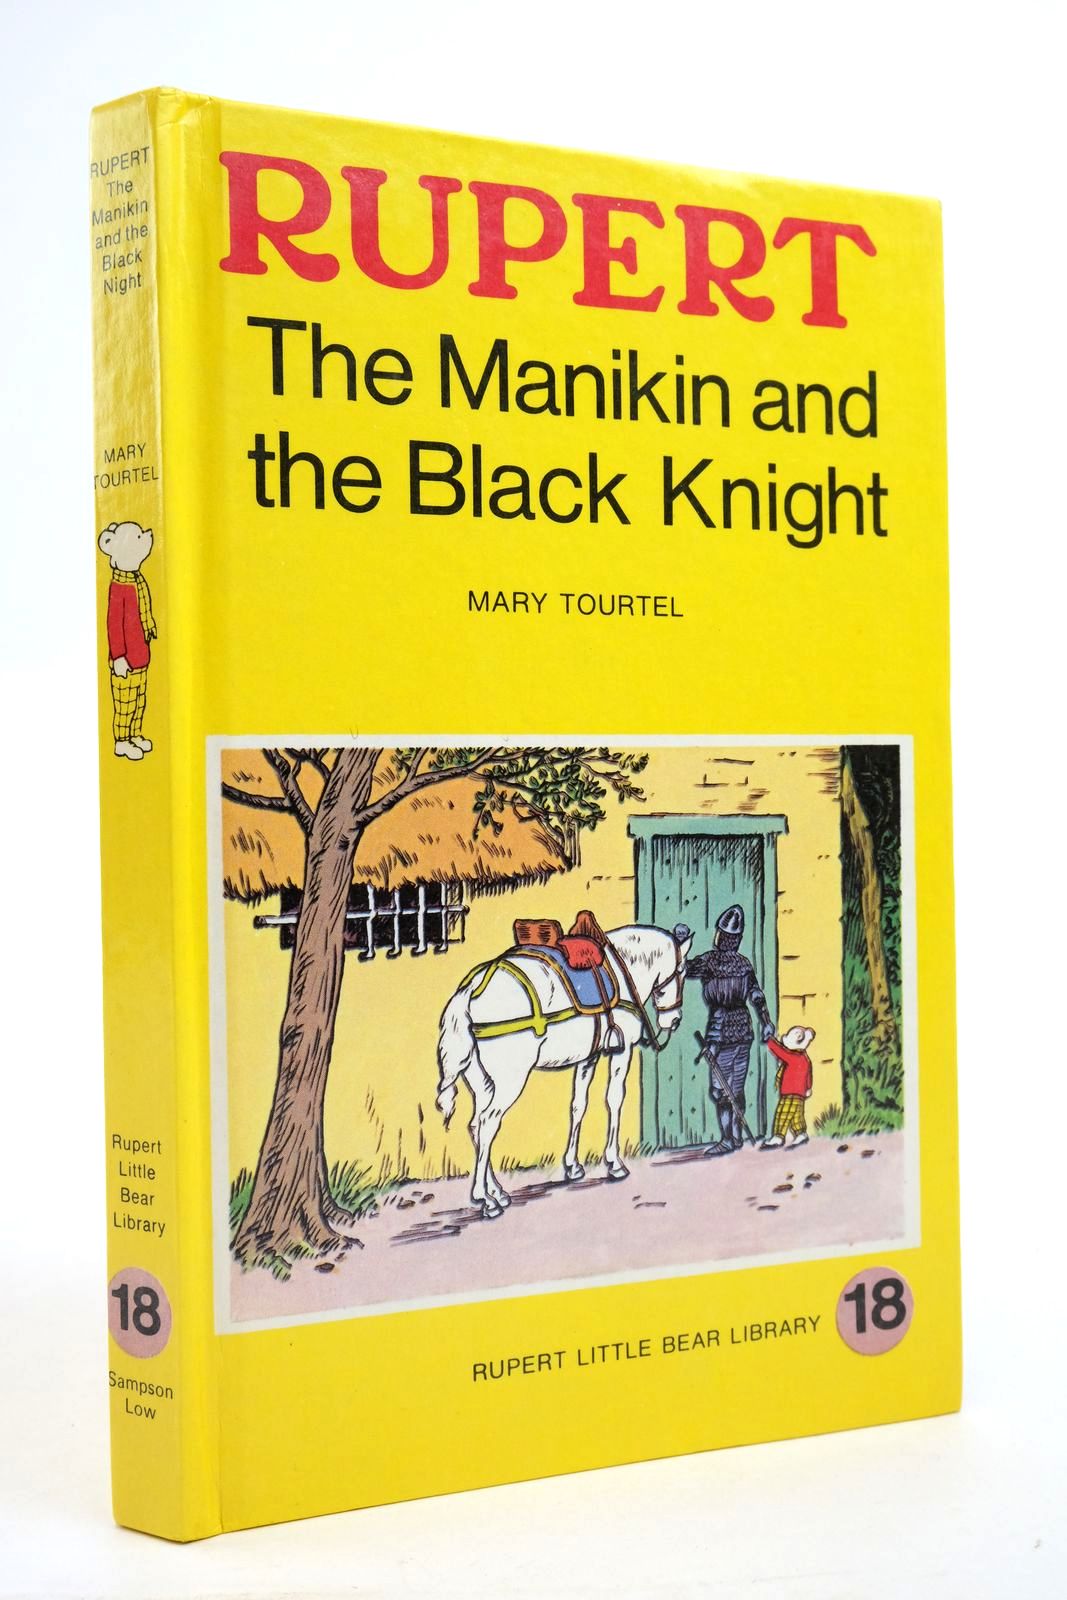 Photo of RUPERT, THE MANIKIN AND THE BLACK KNIGHT - RUPERT LITTLE BEAR LIBRARY No. 18 (WOOLWORTH) written by Tourtel, Mary illustrated by Tourtel, Mary published by Sampson Low, Marston &amp; Co. Ltd. (STOCK CODE: 2136963)  for sale by Stella & Rose's Books